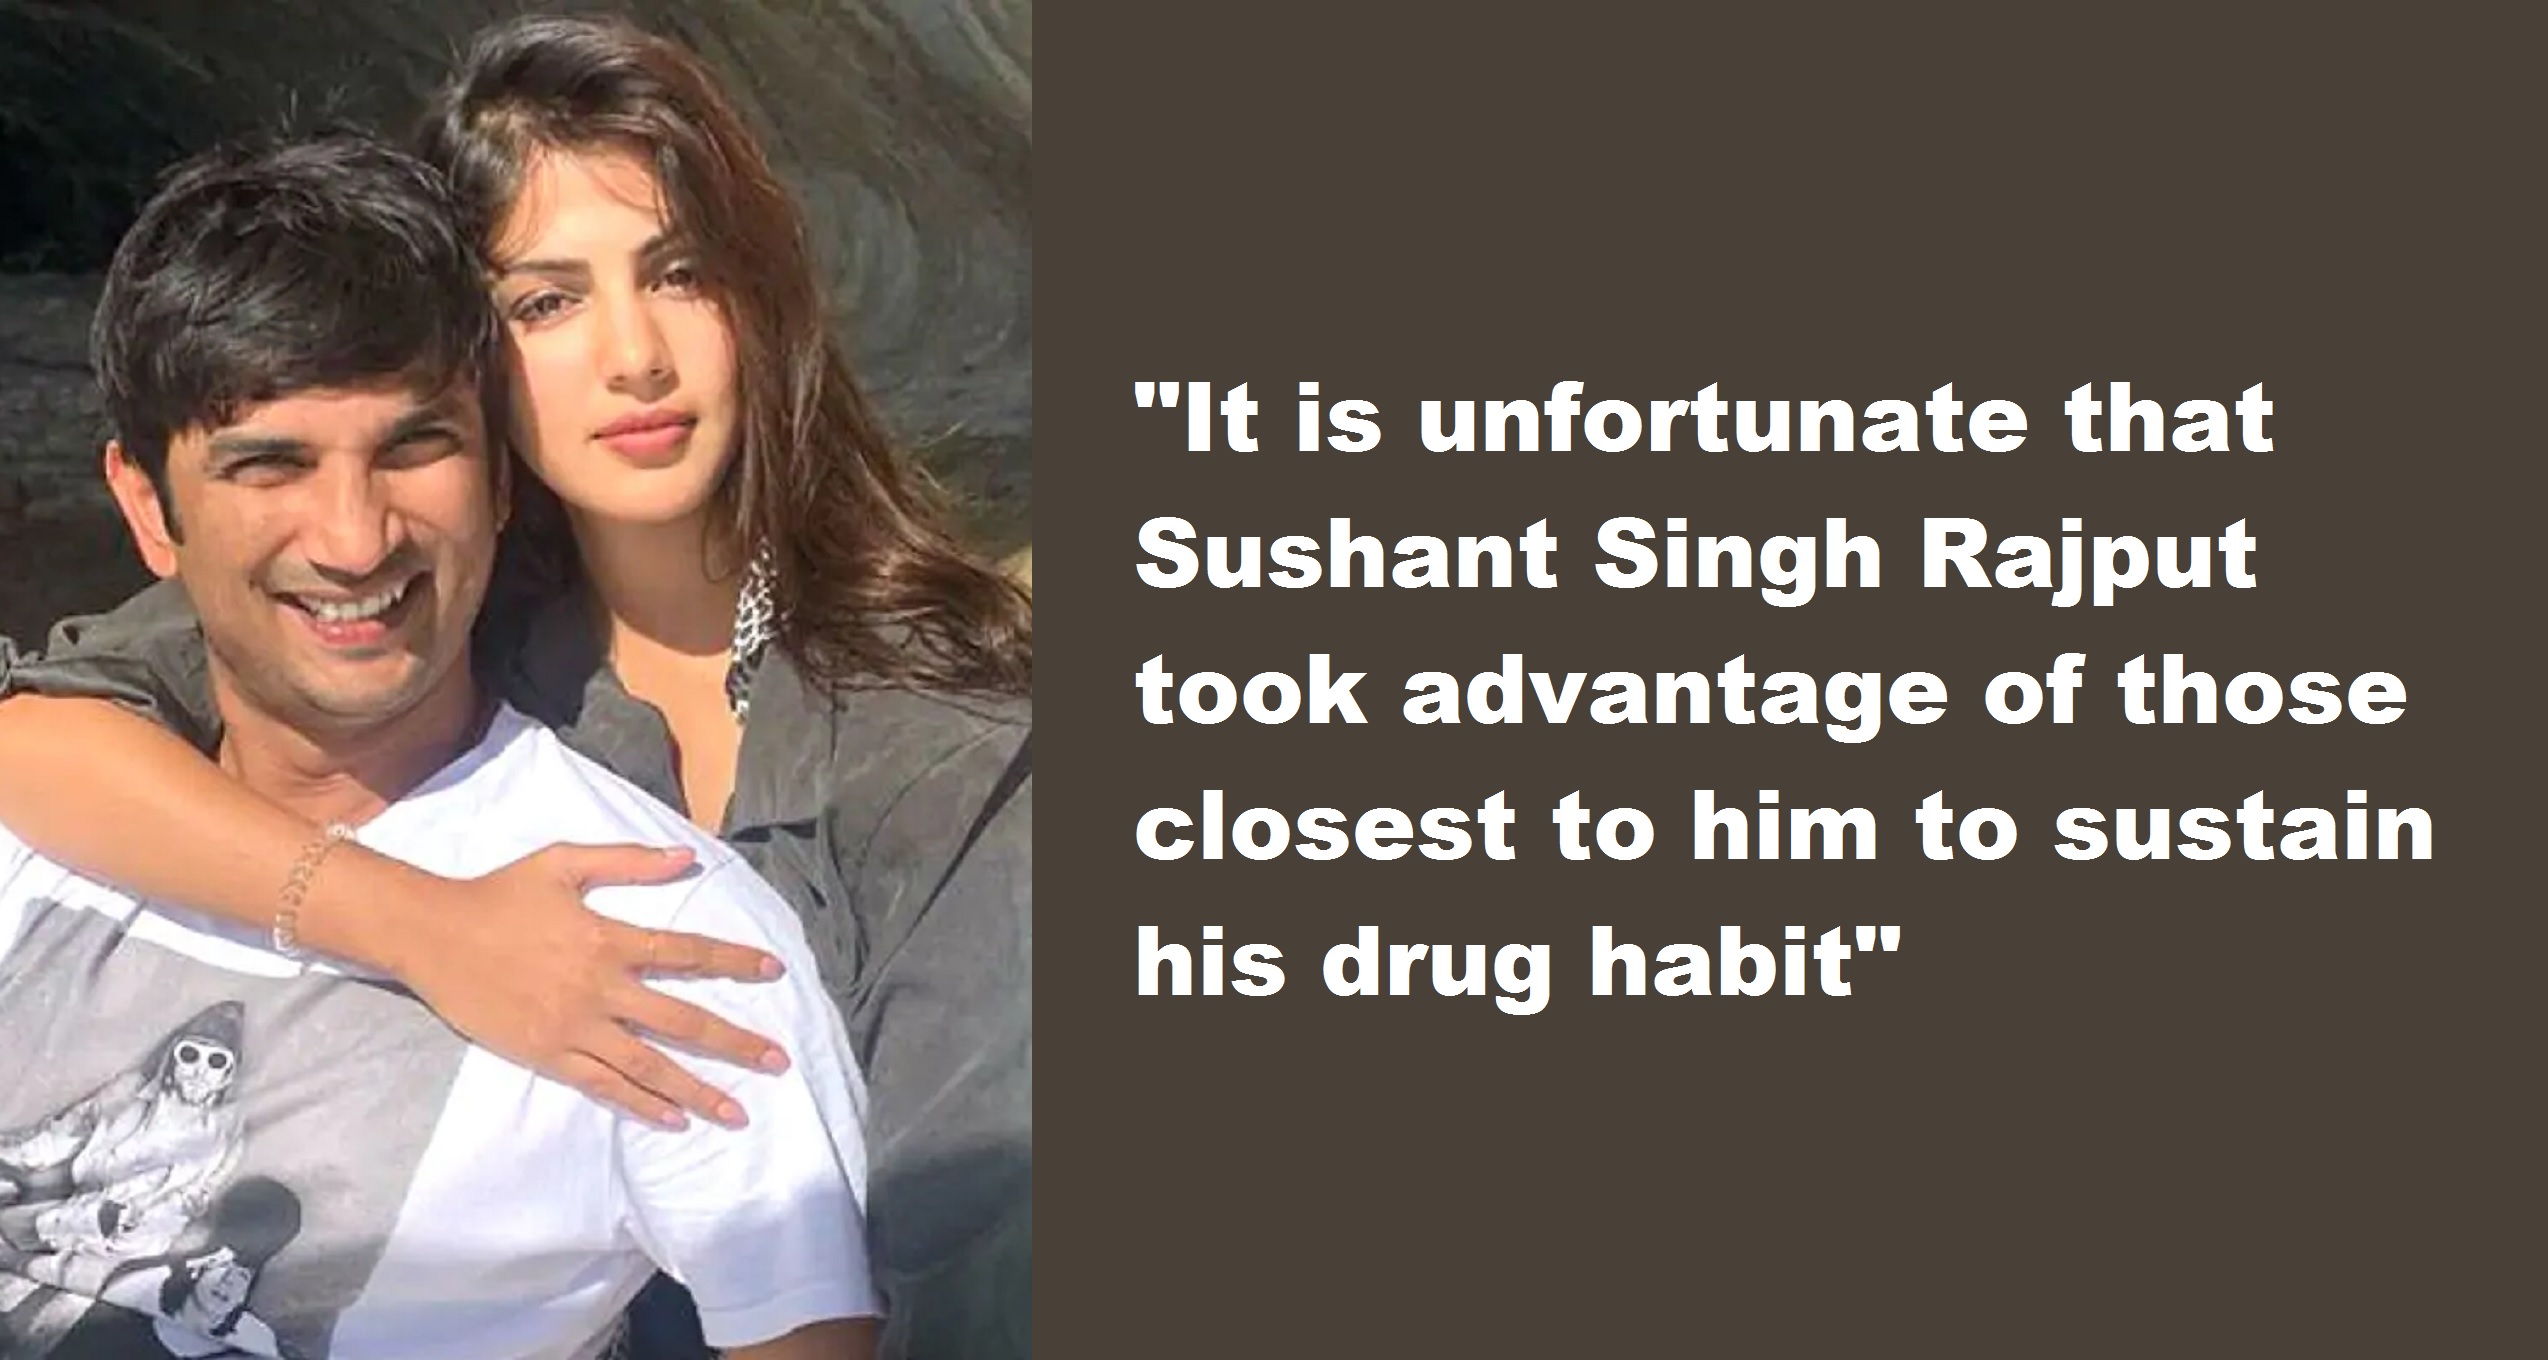 “Sushant Took Advantage Of Those Closest To Him To Procure Drugs” – Rhea Chakraborty Claims In Her Bail Plea